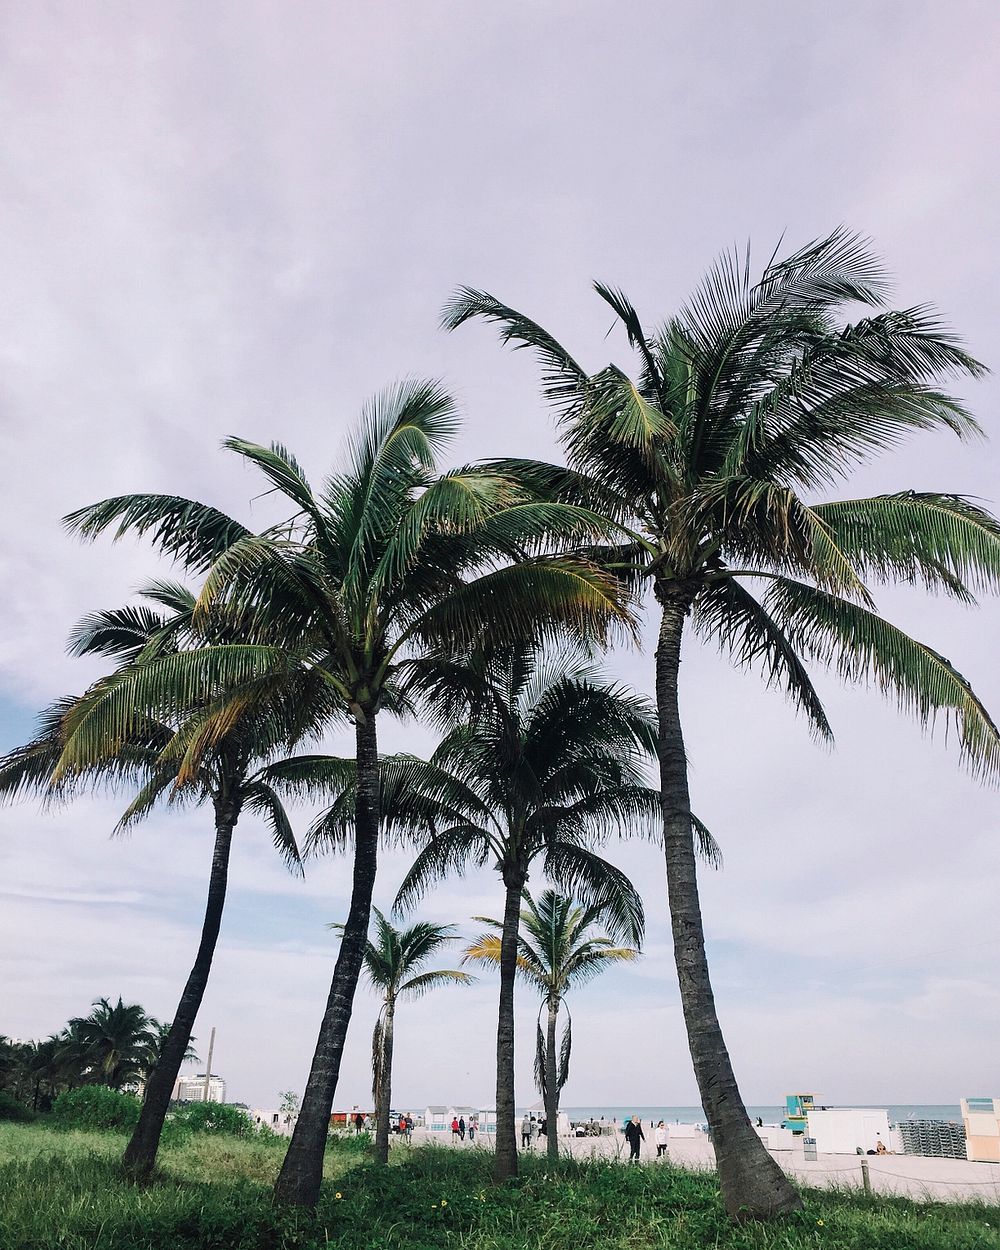 Palm trees on a coastline. Original public domain image from Wikimedia Commons